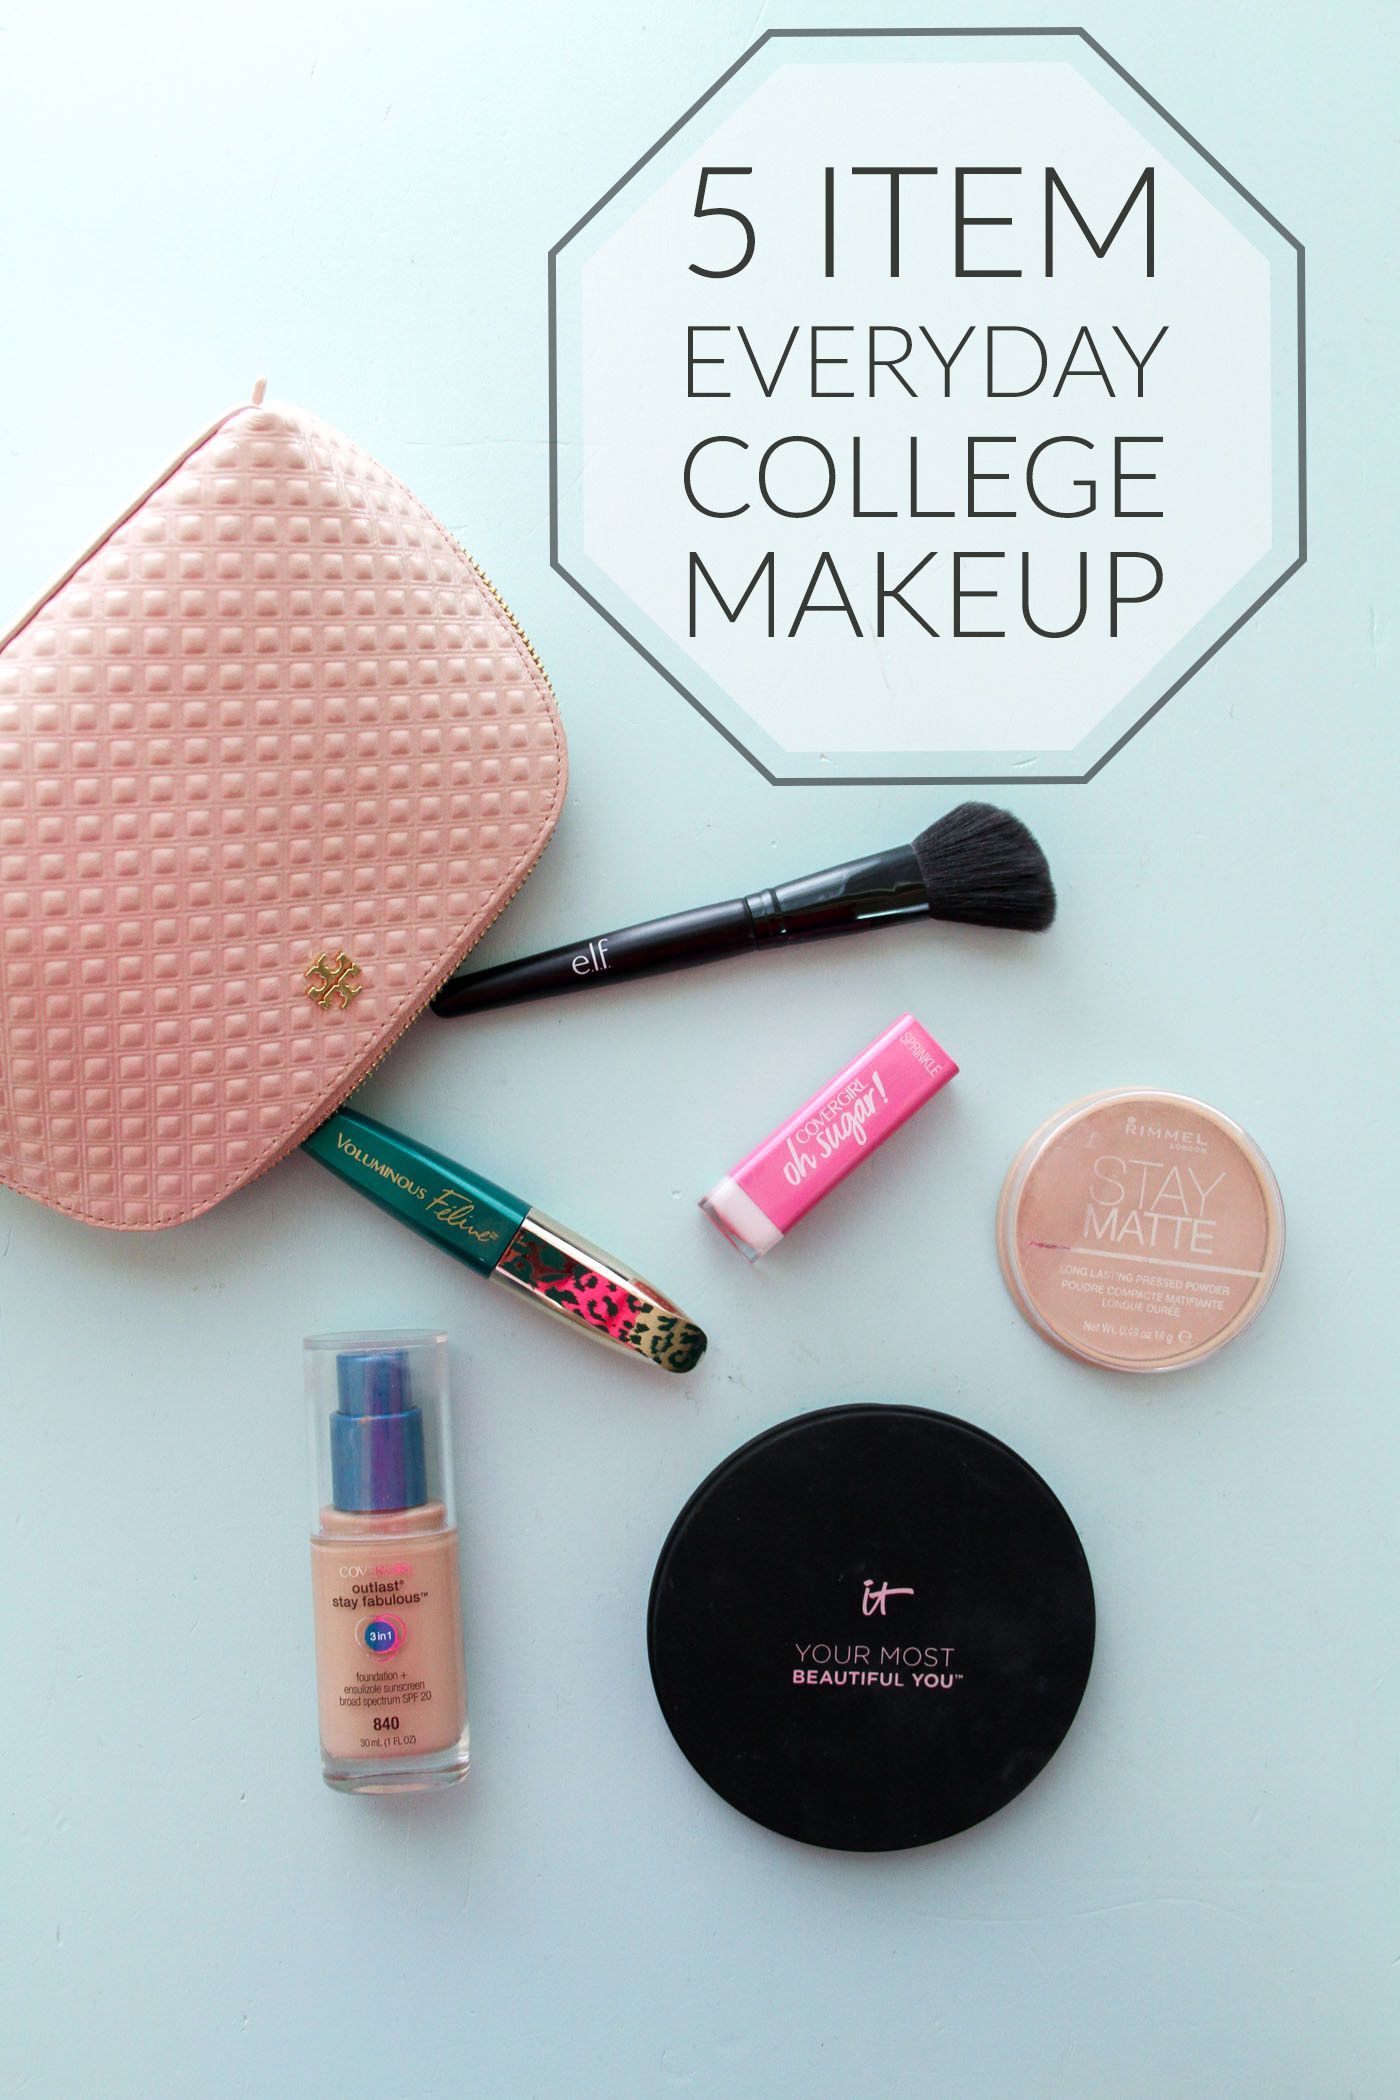 Easy Everyday College Makeup With Only 5 Items -   17 college makeup Everyday ideas